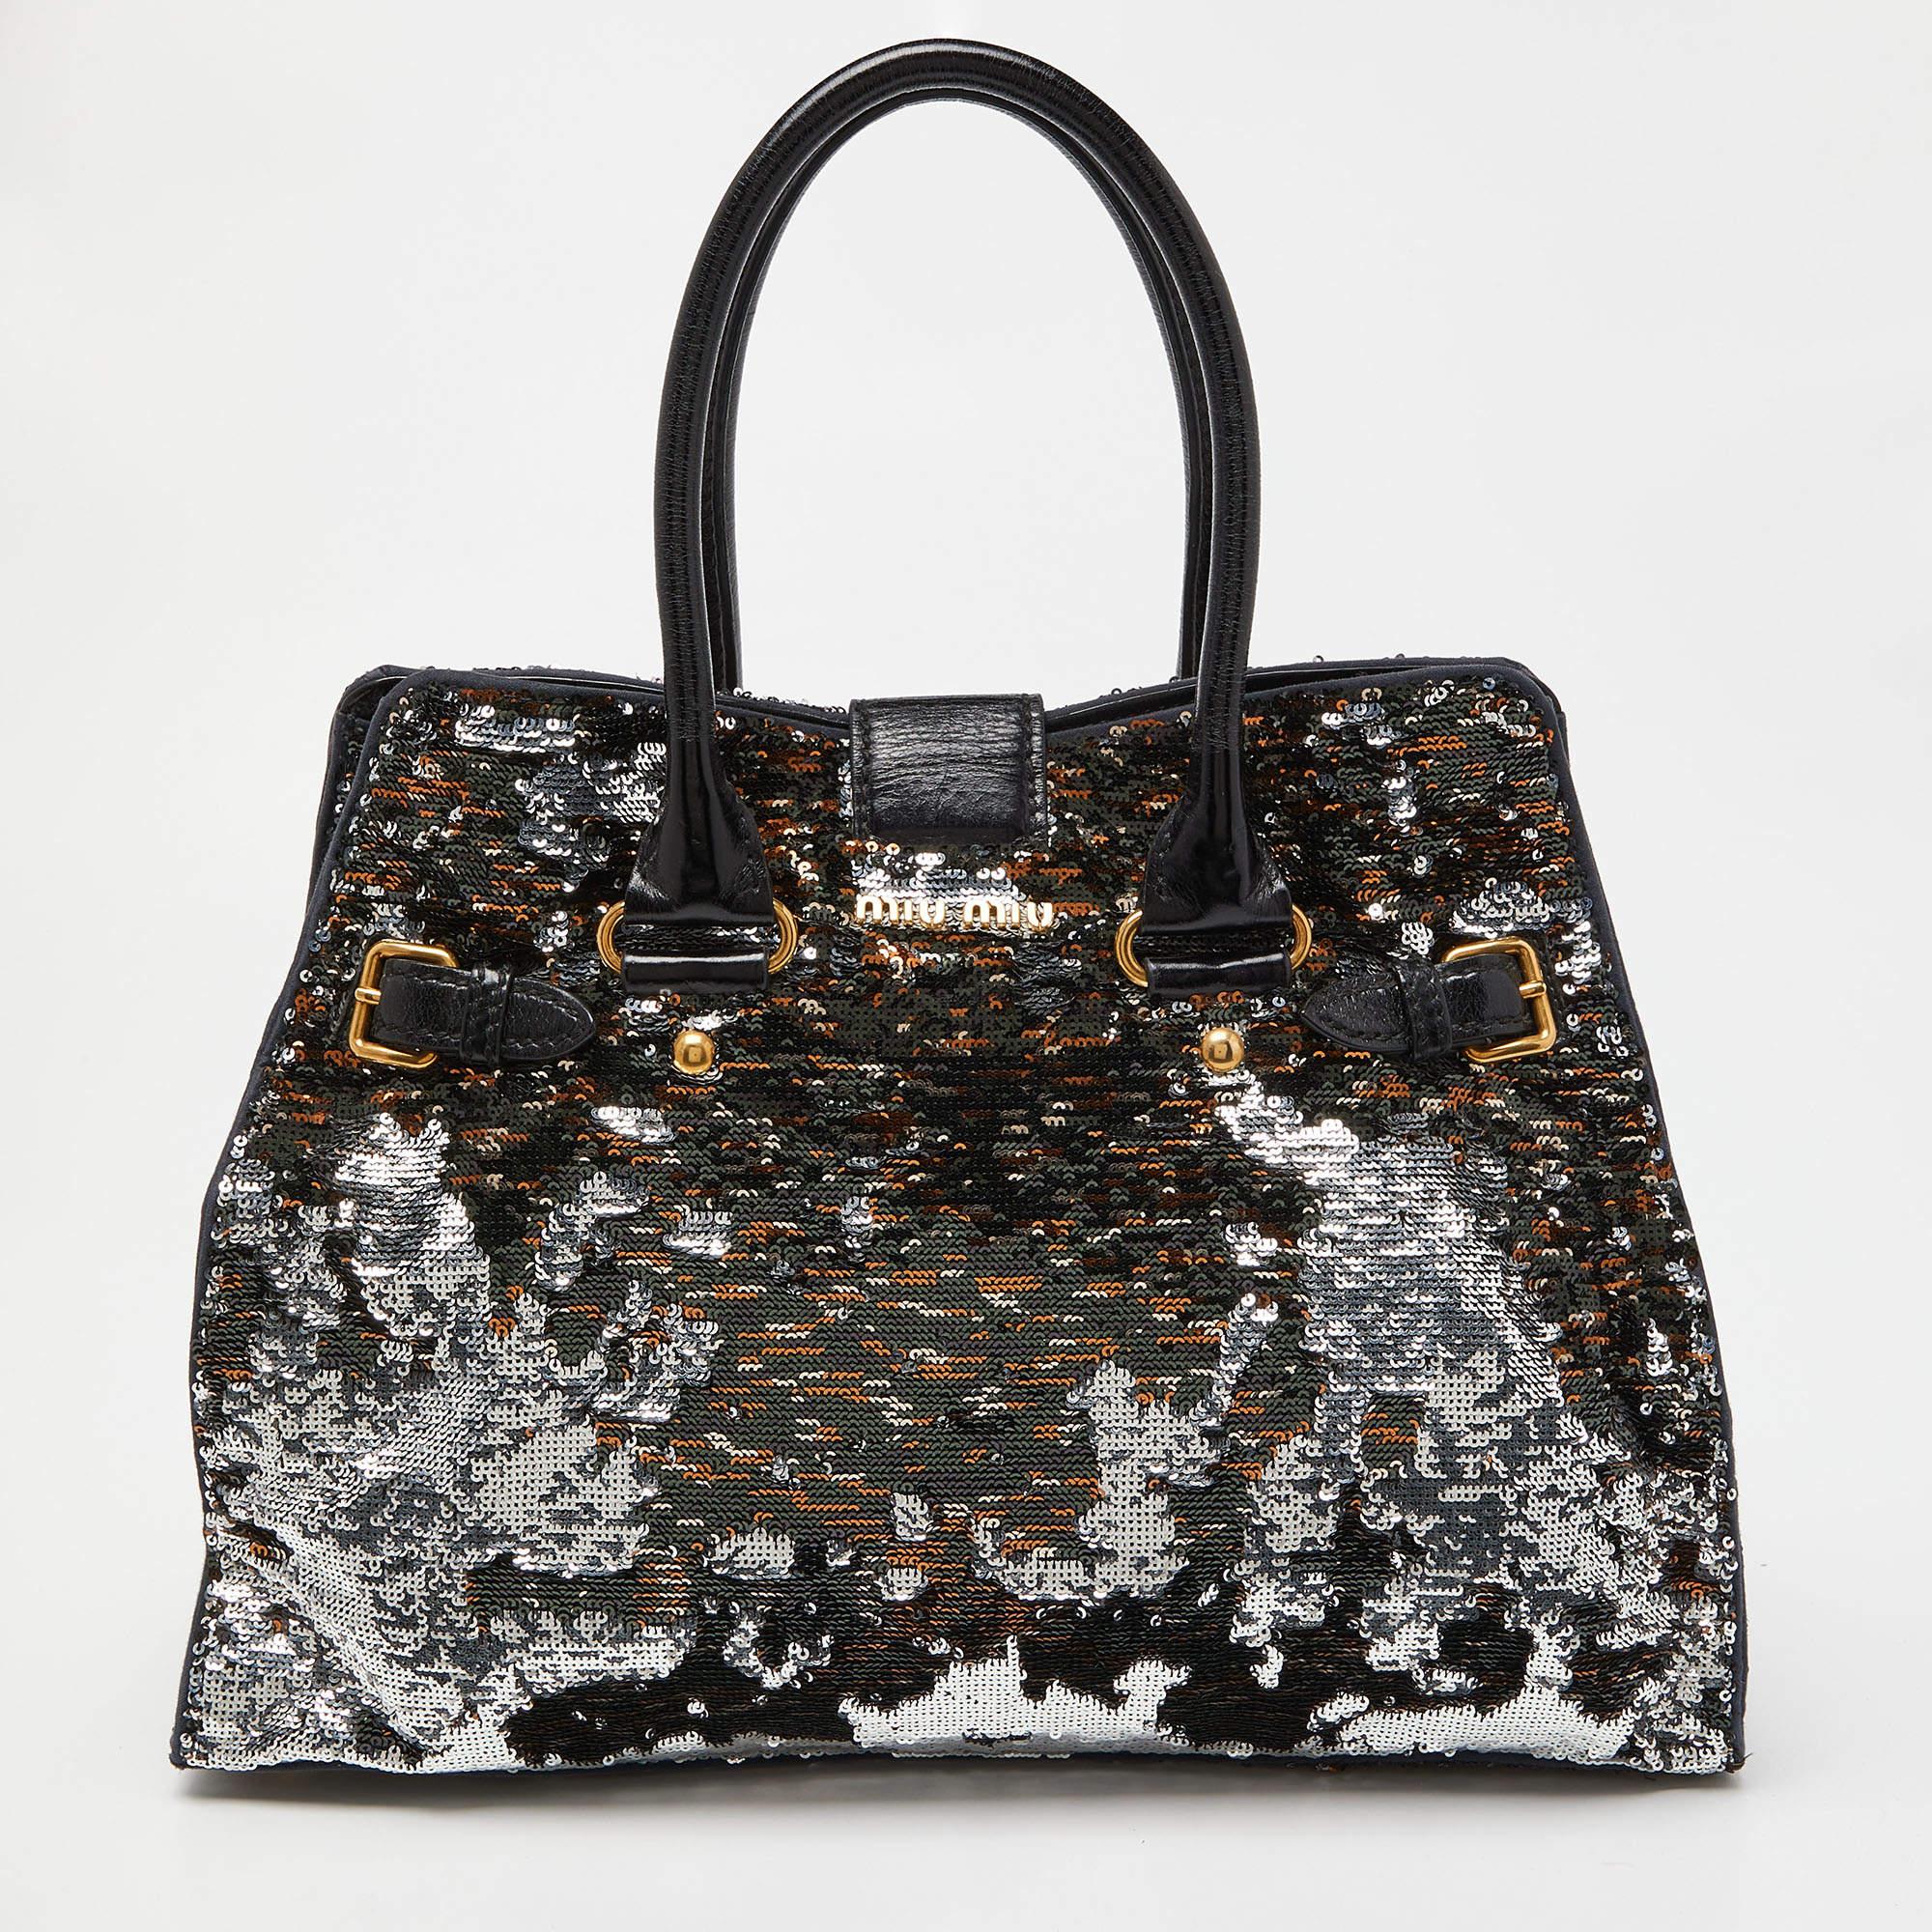 Miu Miu Silver/Black Sequins and Leather Tote For Sale 5